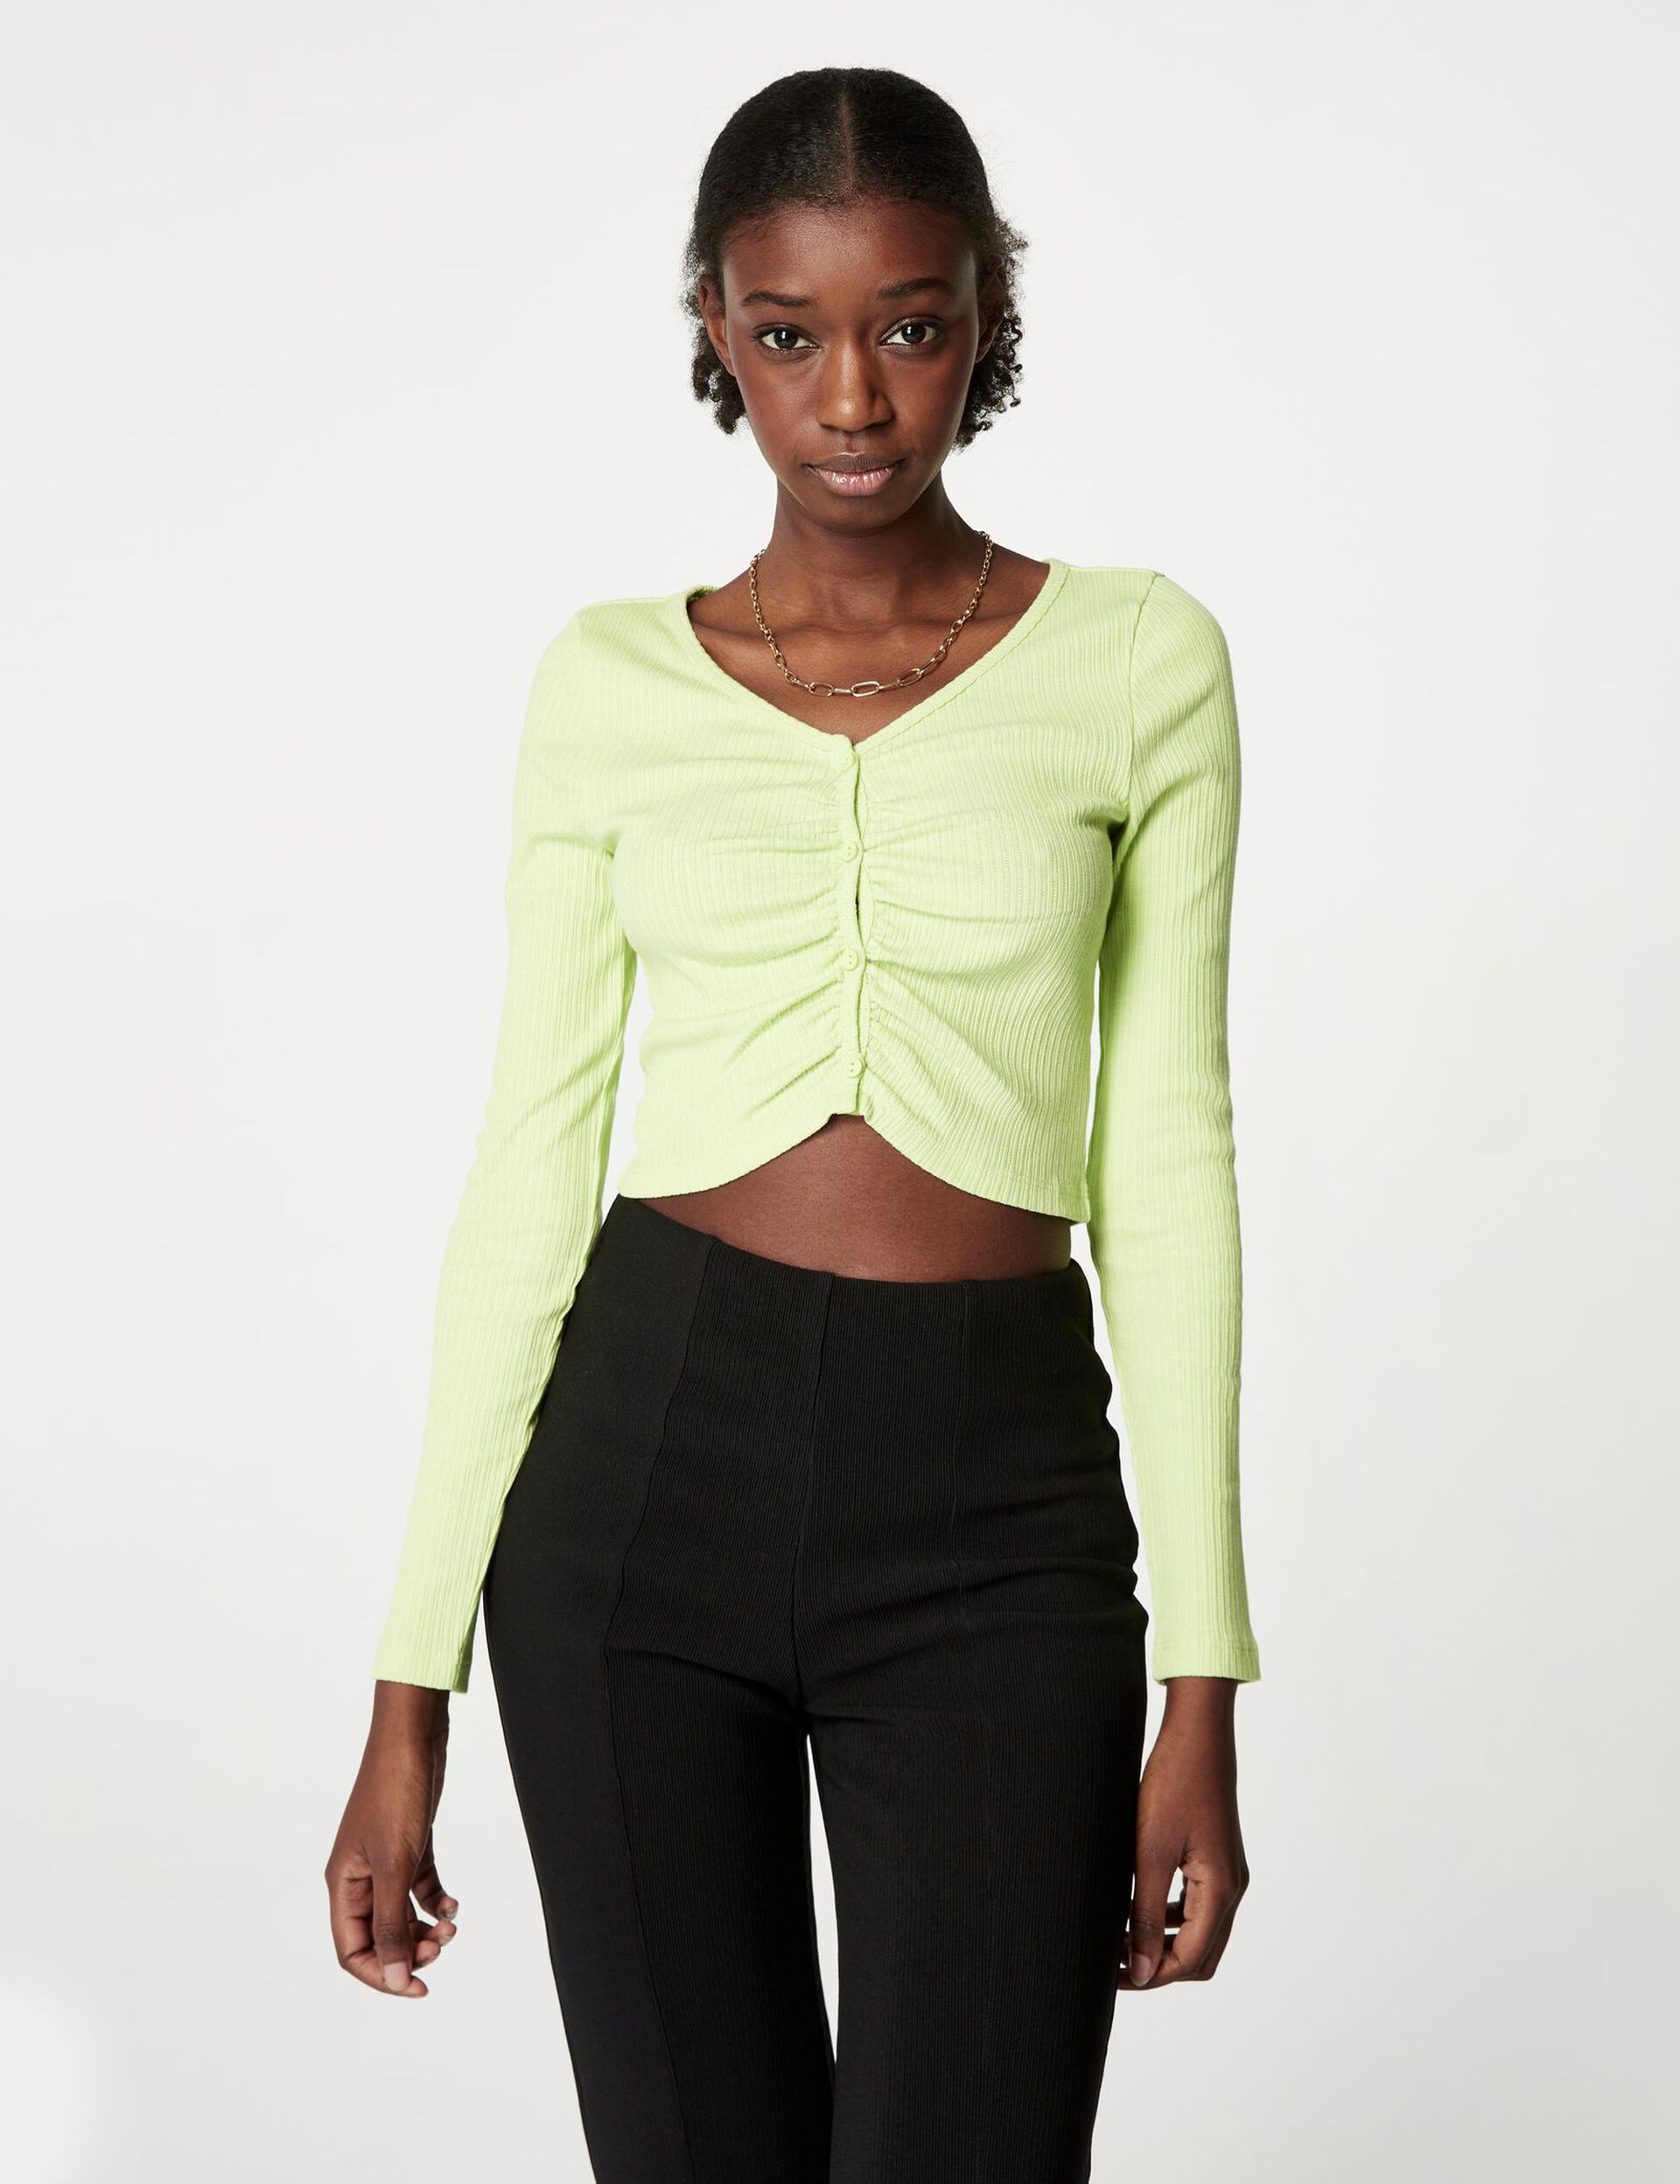 Low-cut ruched top